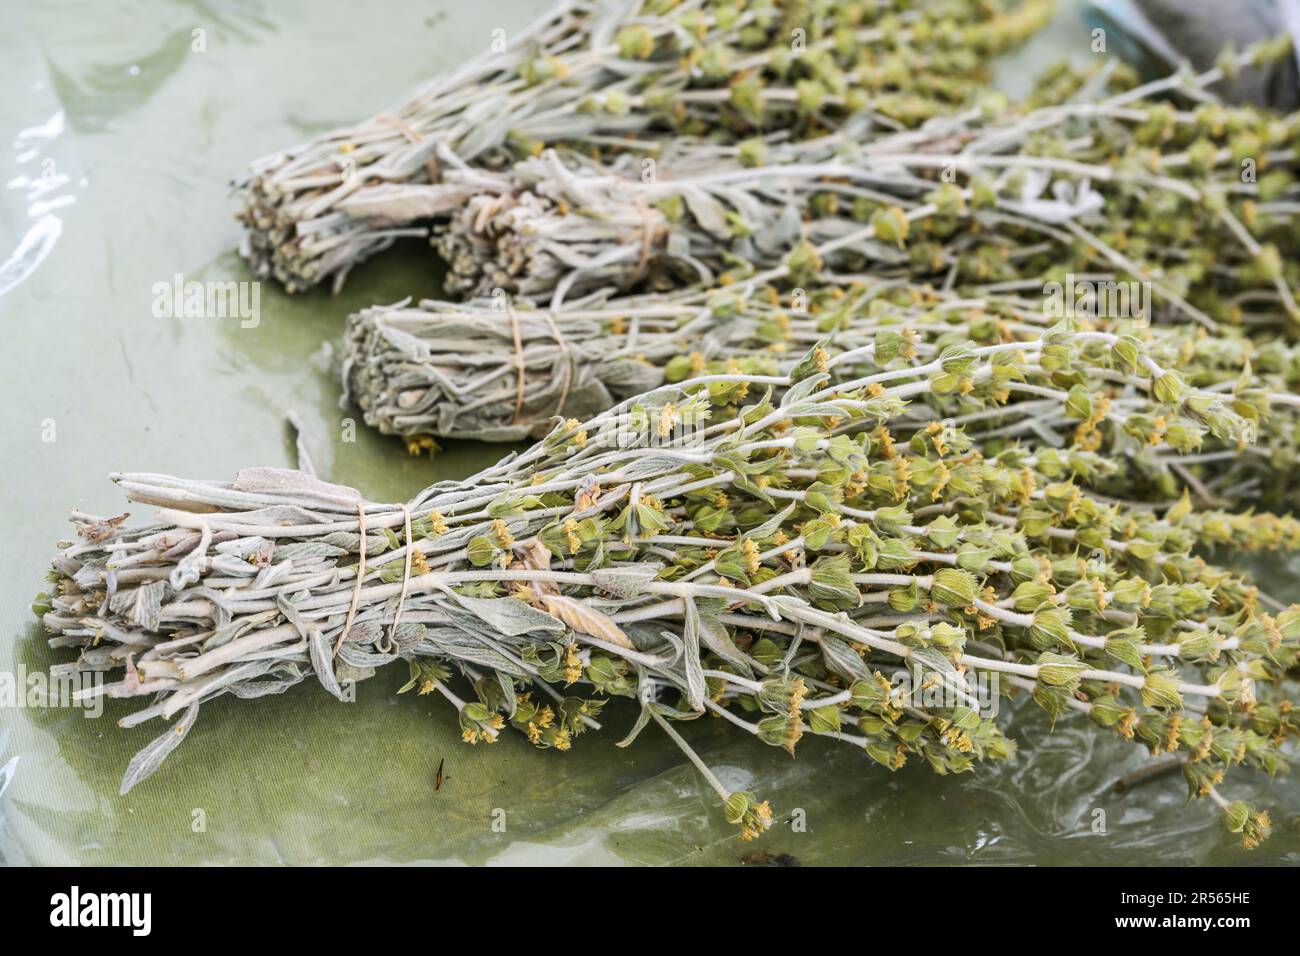 Bunches of dried ironwort or Greek mountain tea (Sideritis Scardica) used as aromatic hot drink or in herbal medicine for colds and digestive problems Stock Photo